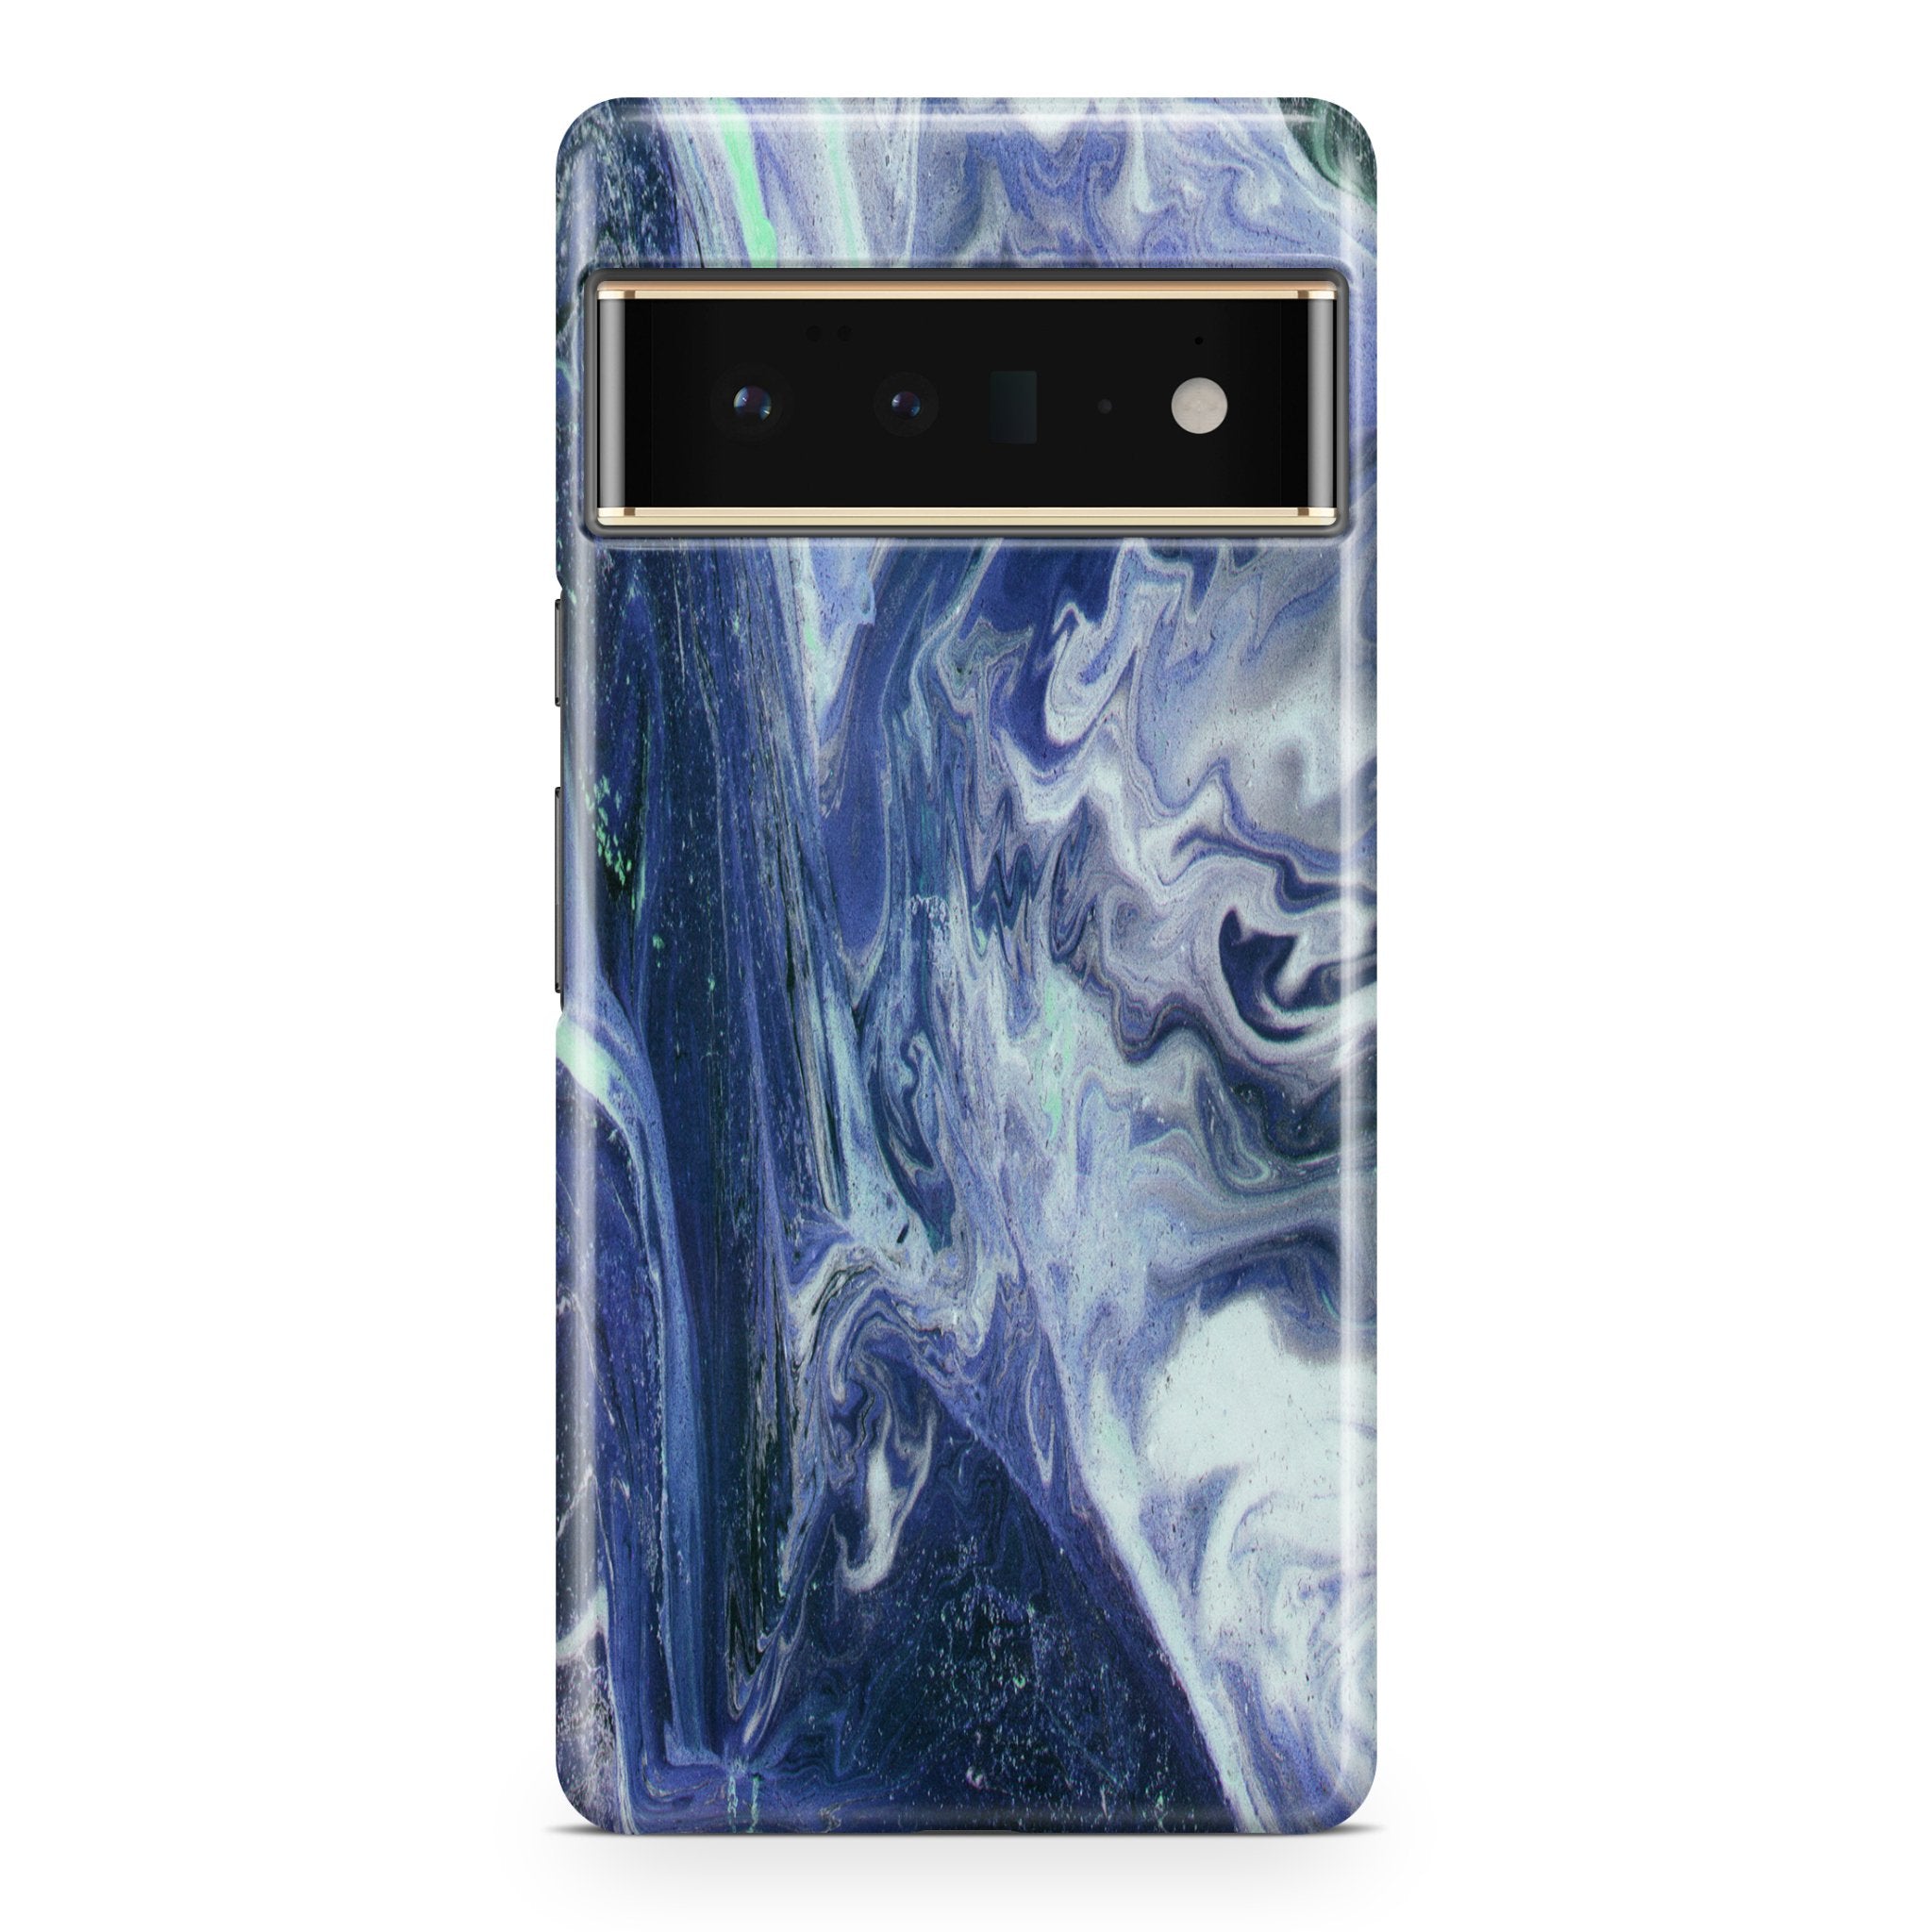 Dark Blue Agate - Google phone case designs by CaseSwagger